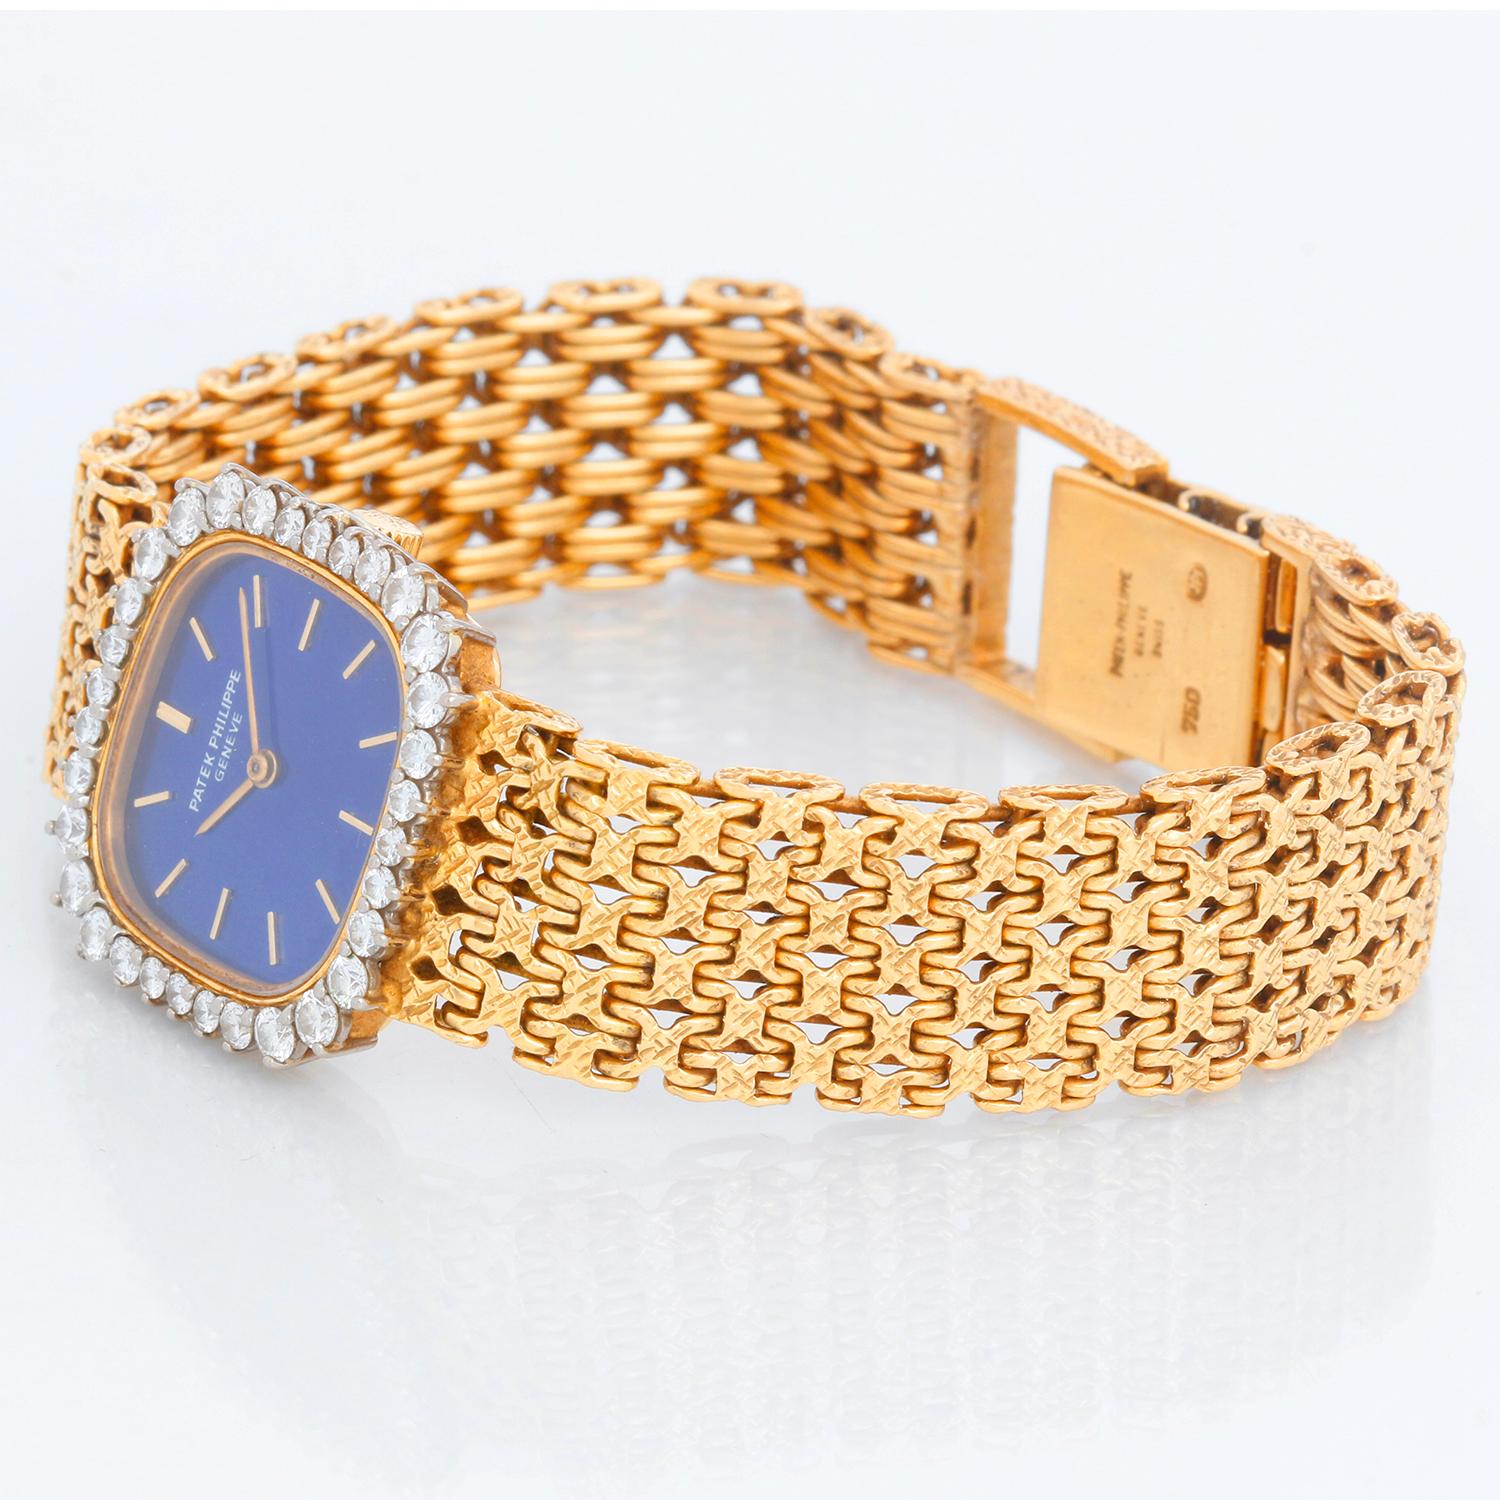 Patek Philippe & Co. 18K Yellow Gold Ref 4181 Ladies' Watch - Manual. 18K Yellow gold with diamond bezel ( 23 mm x 29 mm ). Blue dial with applied gold baton markers. Patek Philippe link bracelet with fold over clasp. Measures 6 1/2 inch wrist.